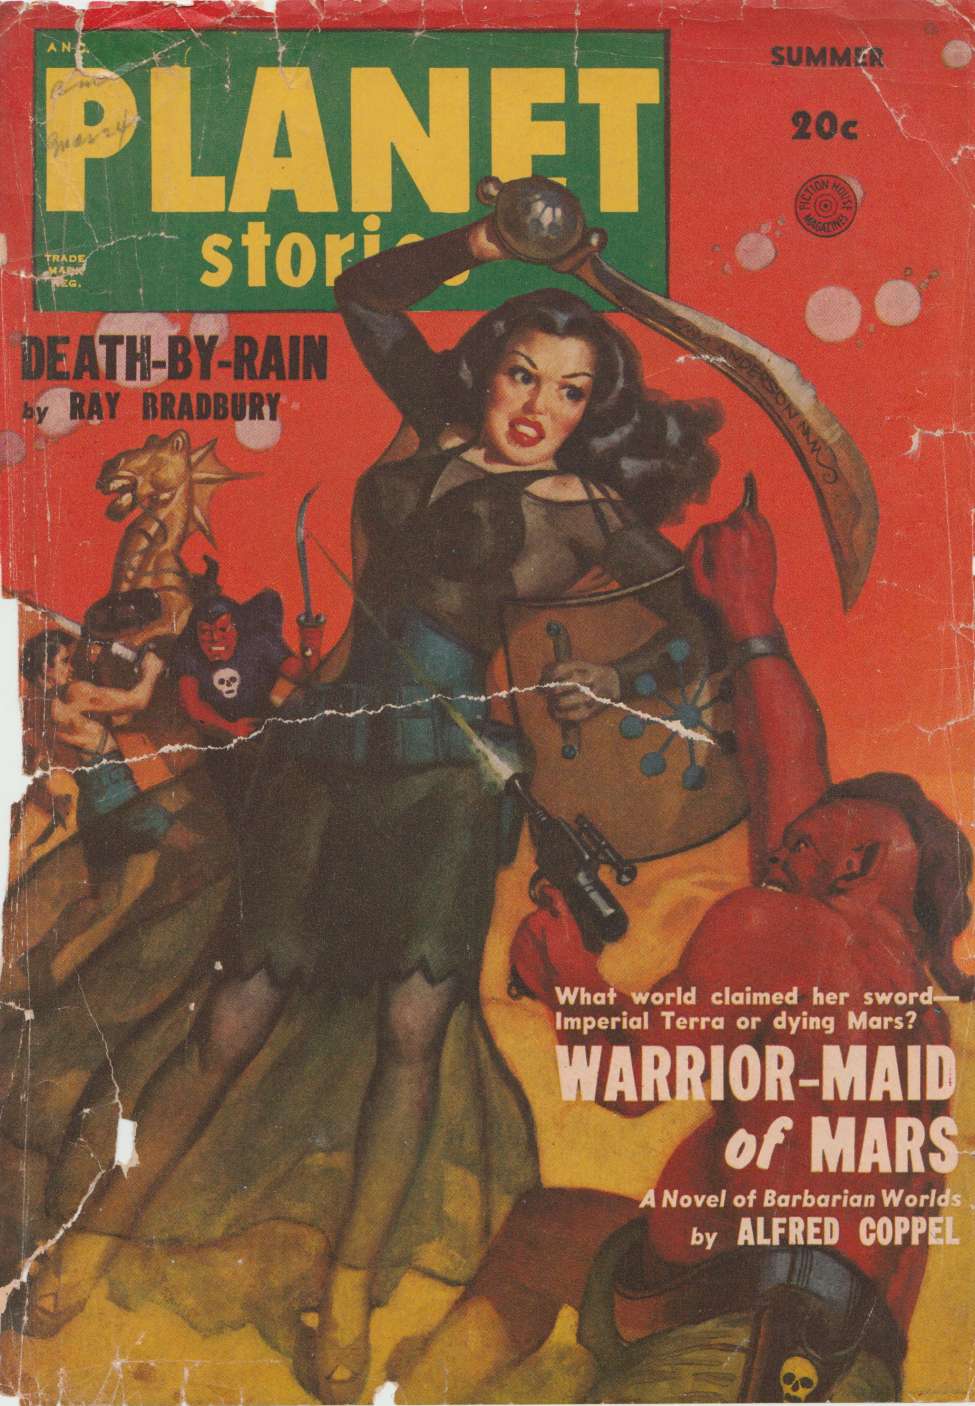 Comic Book Cover For Planet Stories v4 7 - Warrior-Maid of Mars - Alfred Coppel, Jr.